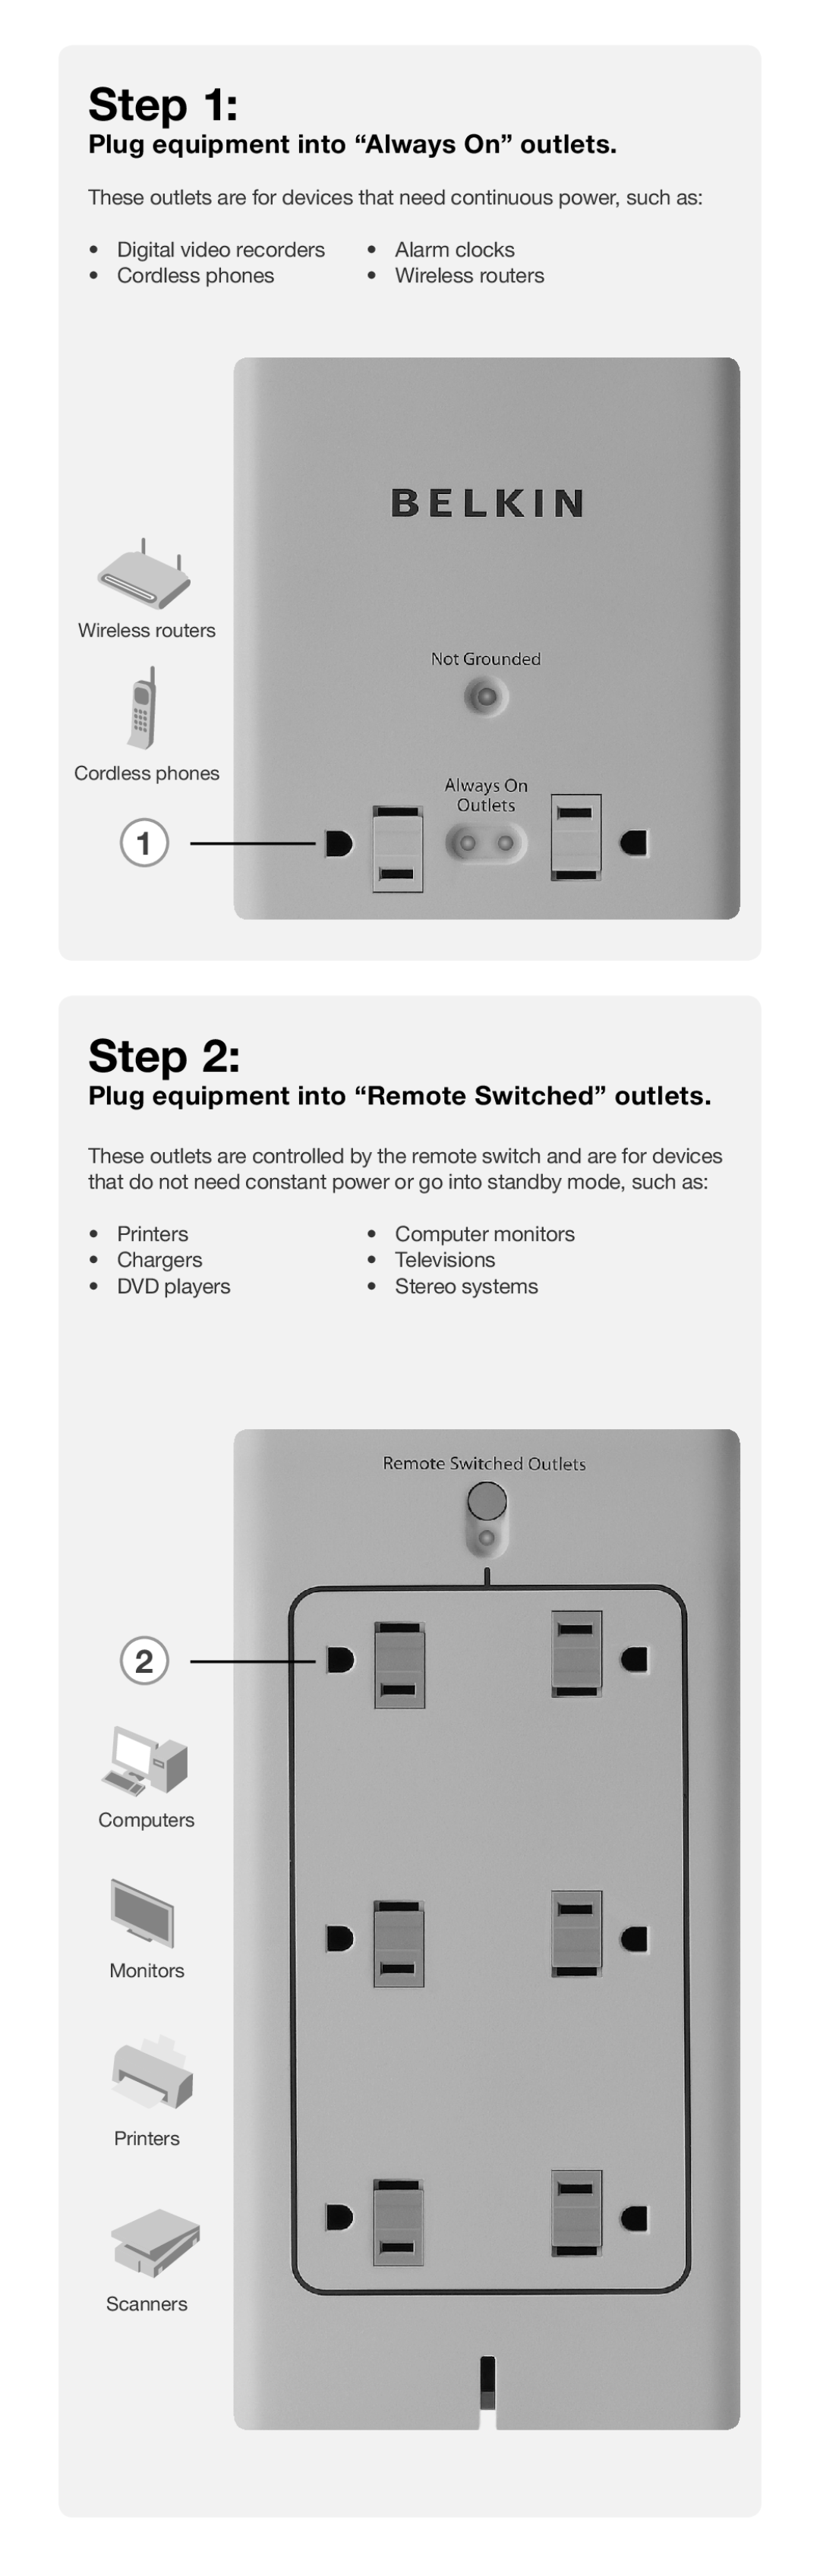 Belkin PM01629 quick start Step, Plug equipment into “Always On” outlets, Plug equipment into “Remote Switched” outlets 